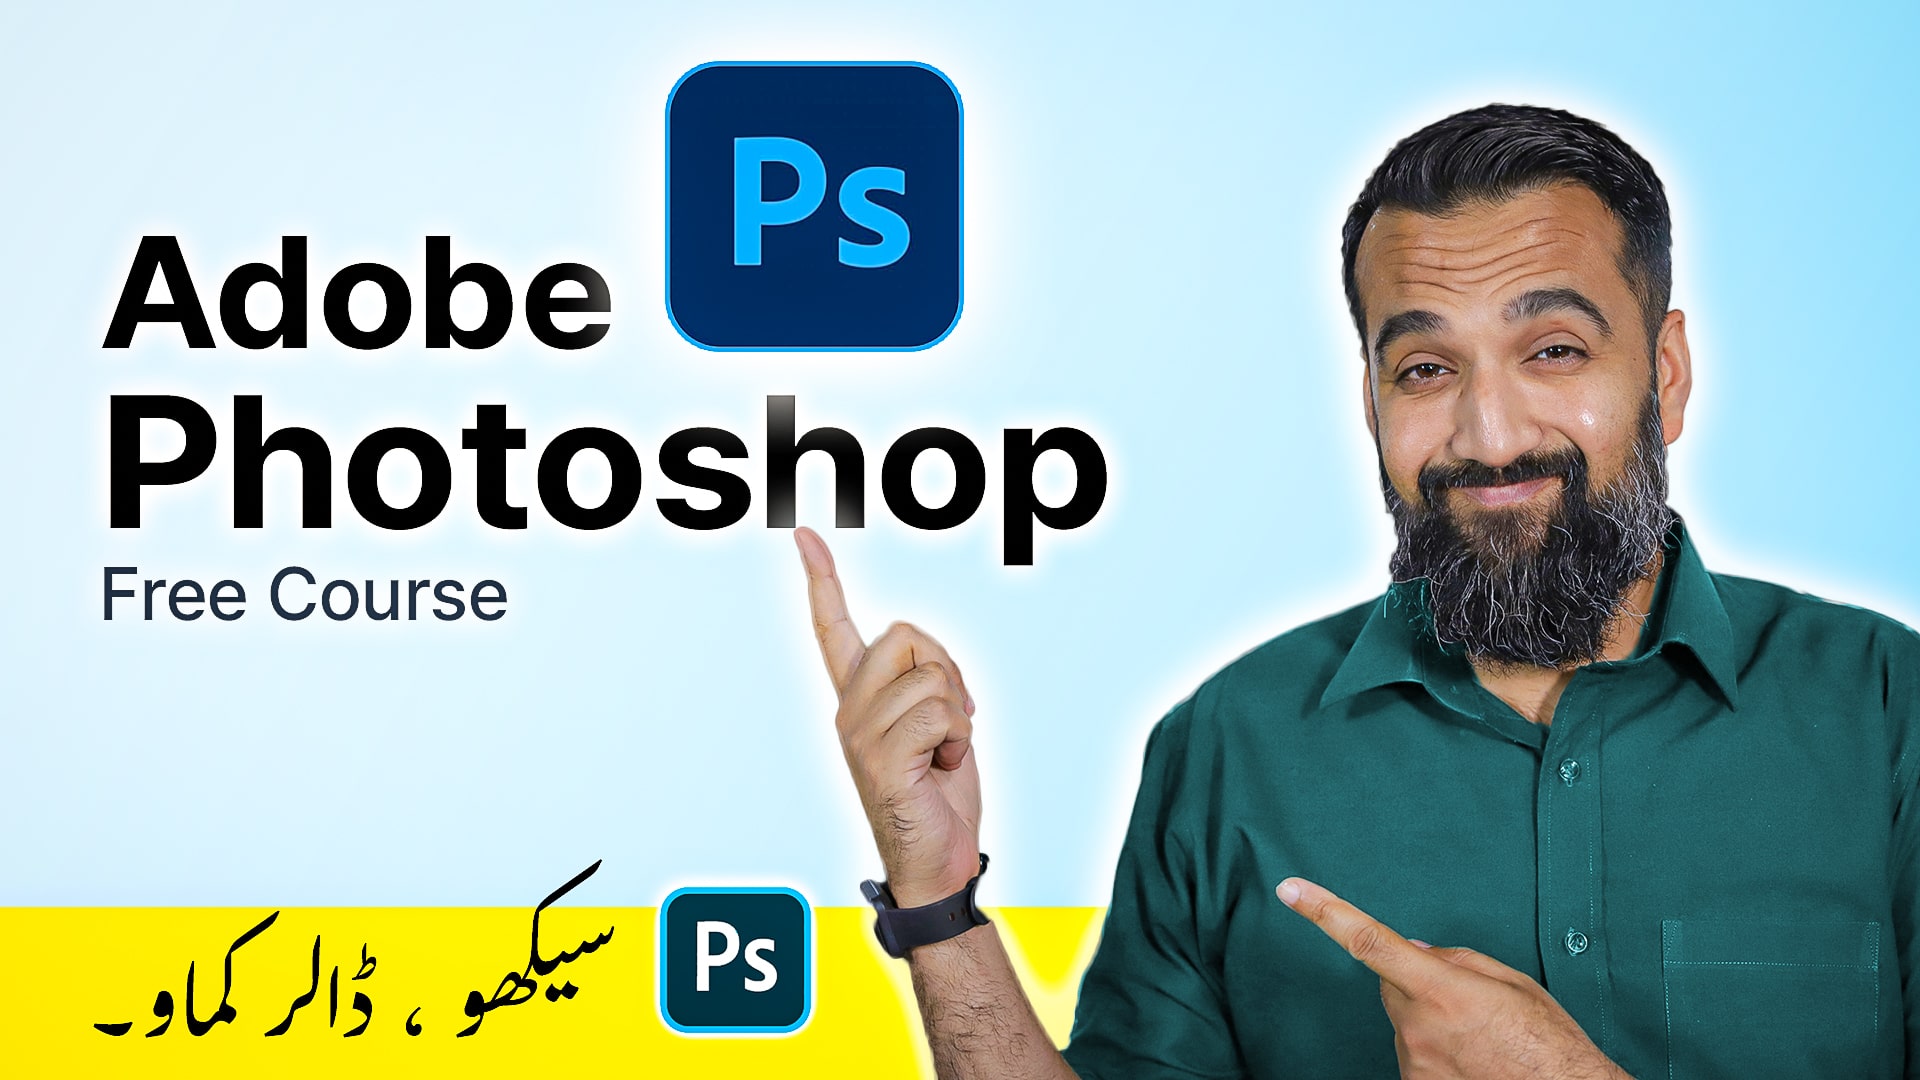  adobe-photoshop-course-for-beginners-graphic-designer-by-azadchaiwala-64f85b3d5a325858970356.jpg 